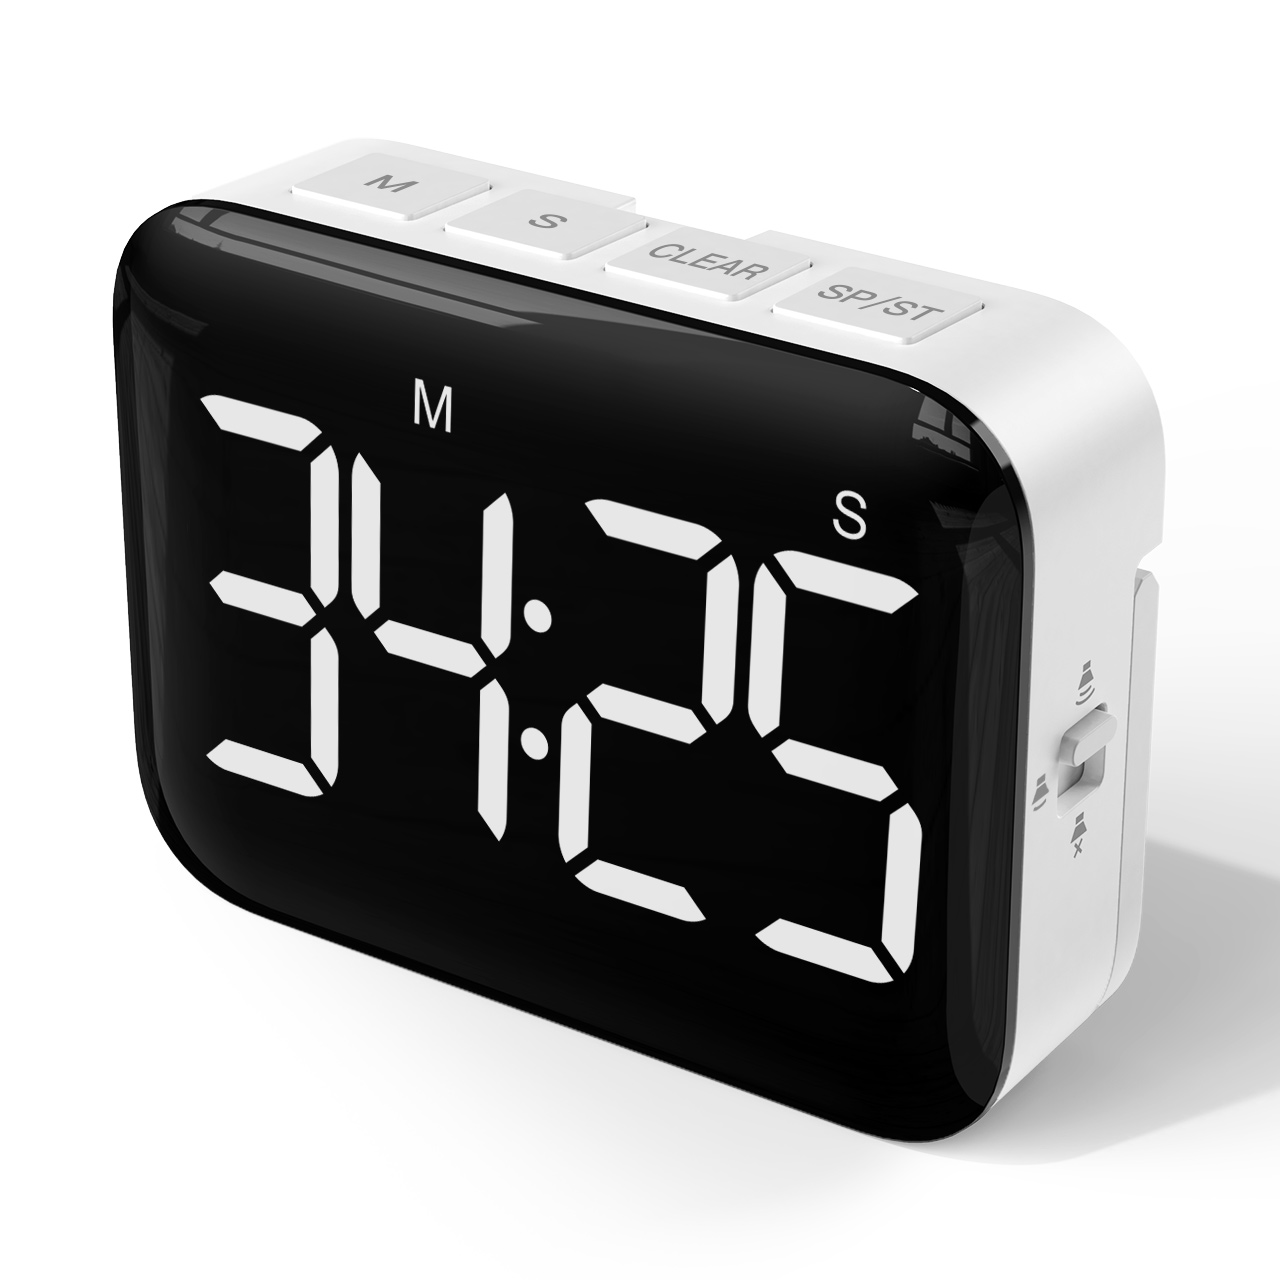 Digital Kitchen Cooking Timer - Magnetic Countdown Count Up Timer With Large Led Display Loud Volume And 2 Brightness, Easy To Use For Kids Teachers